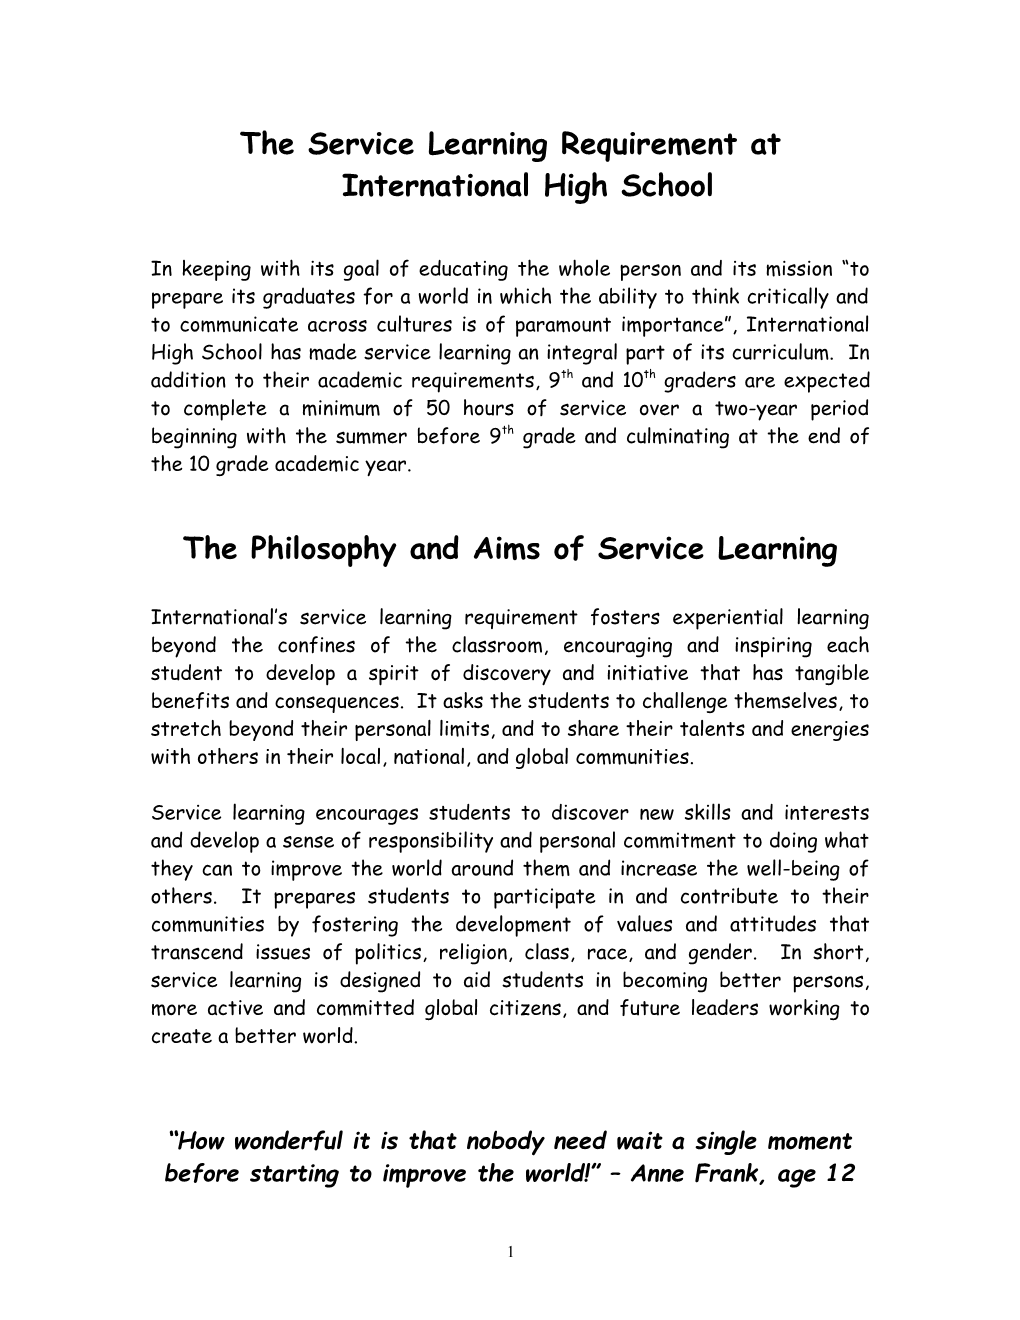 The Creativity, Action, Service (CAS) Requirement for the International Baccalaureate